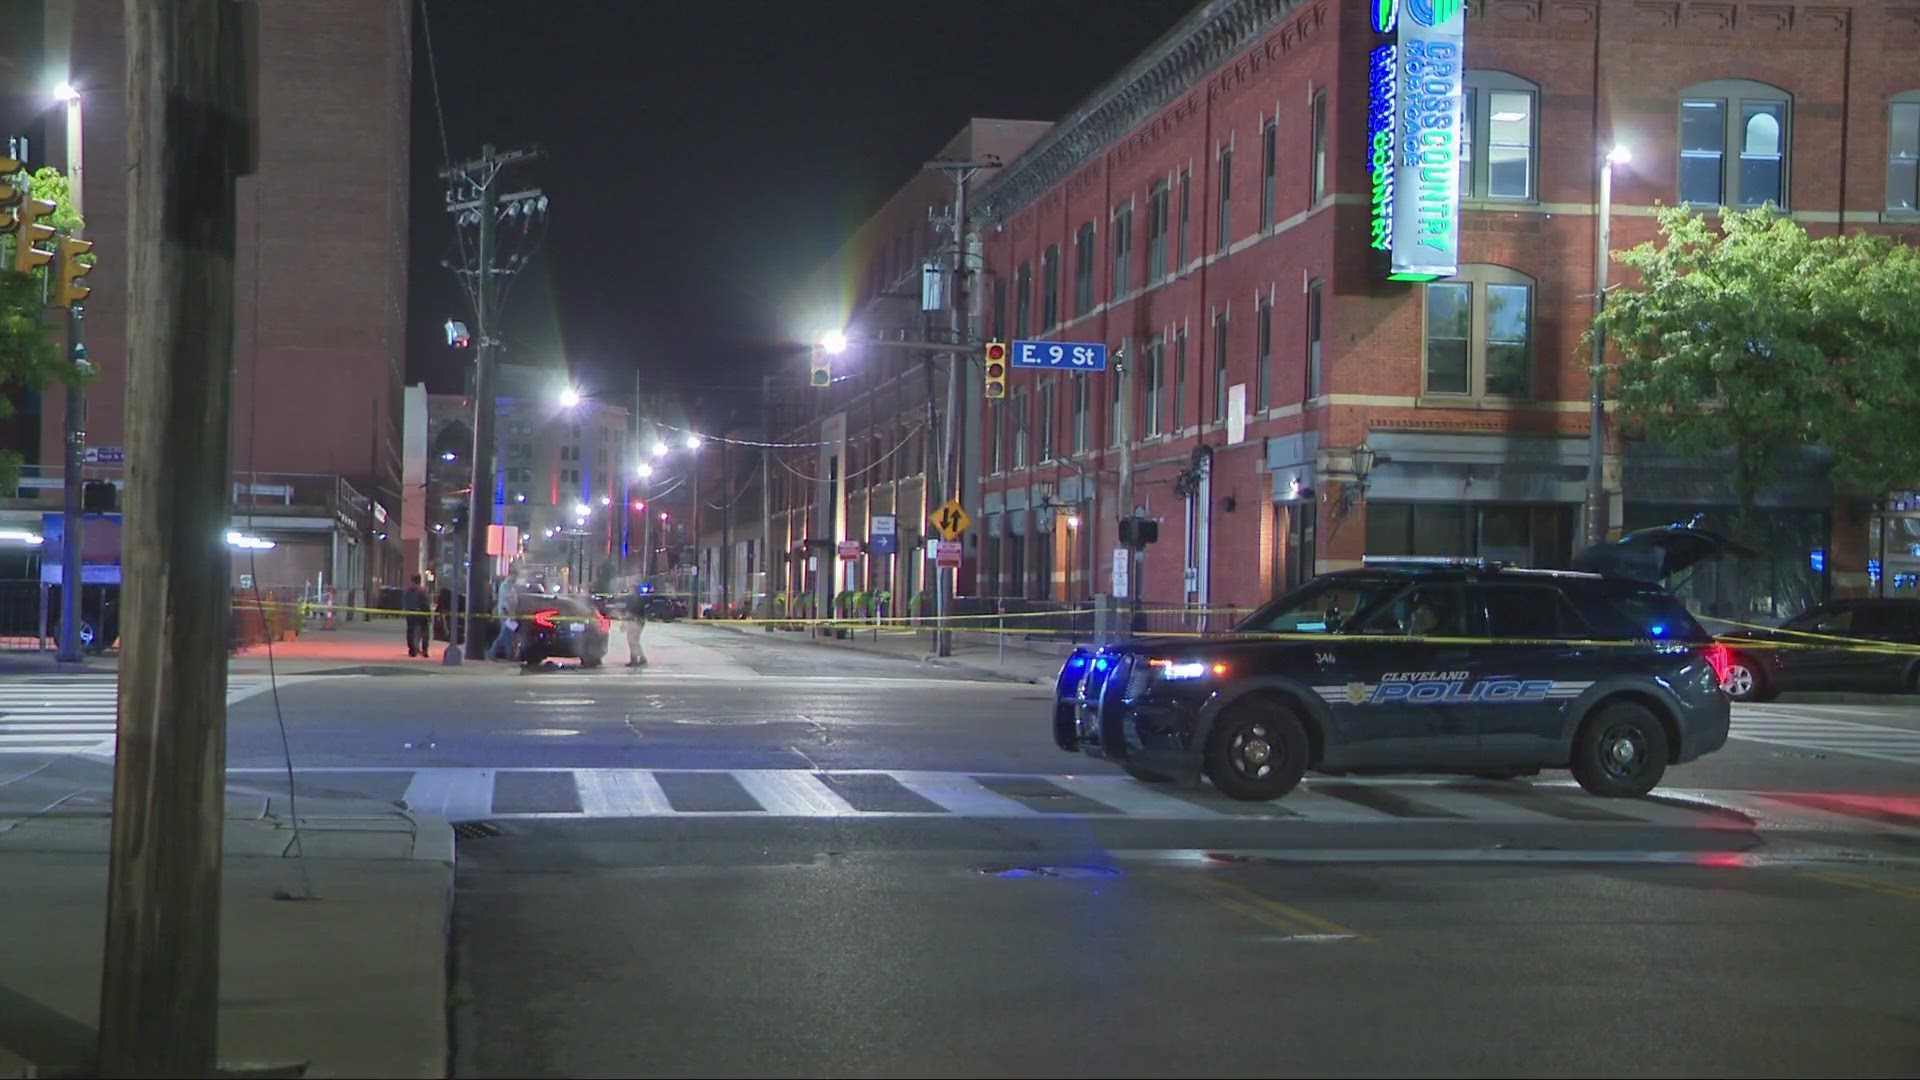 3 people were killed and 10 injured in several more weekend shooting incidents.